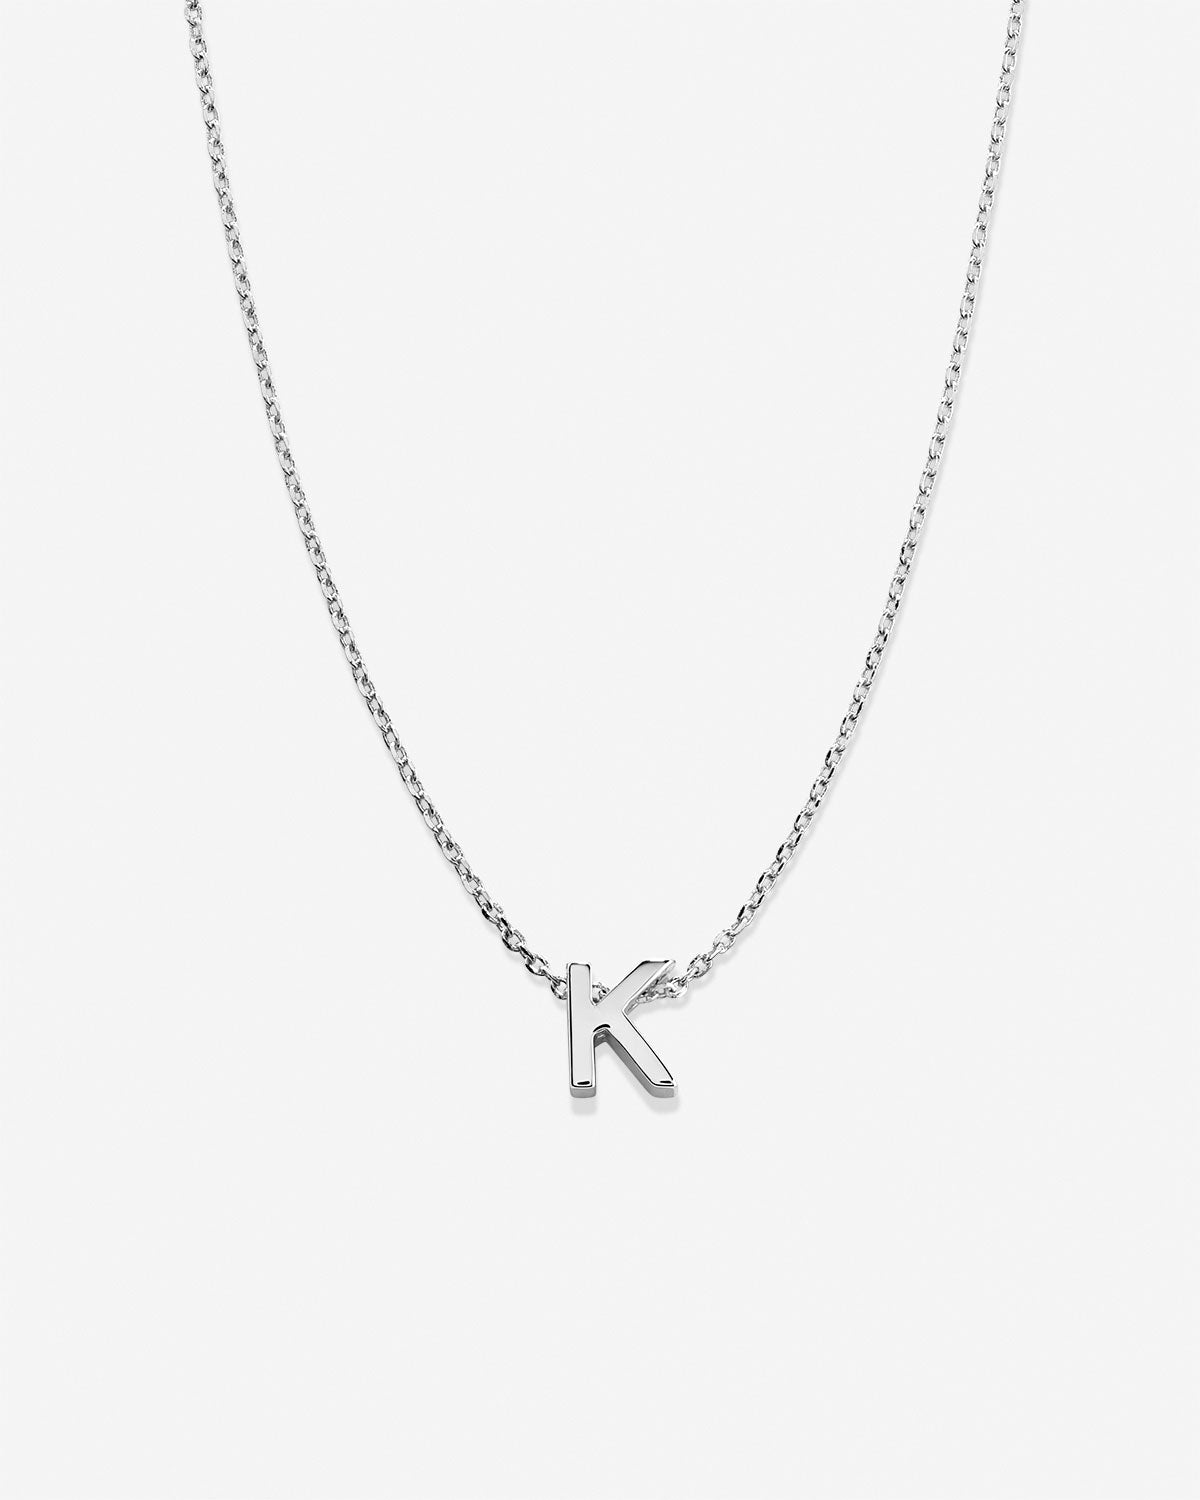 14K White Gold Initial Necklace, Small Letter Necklace, Minimalist Initial  Necklace, Letter K Necklace in 14K Gold , Personalized Jewelry